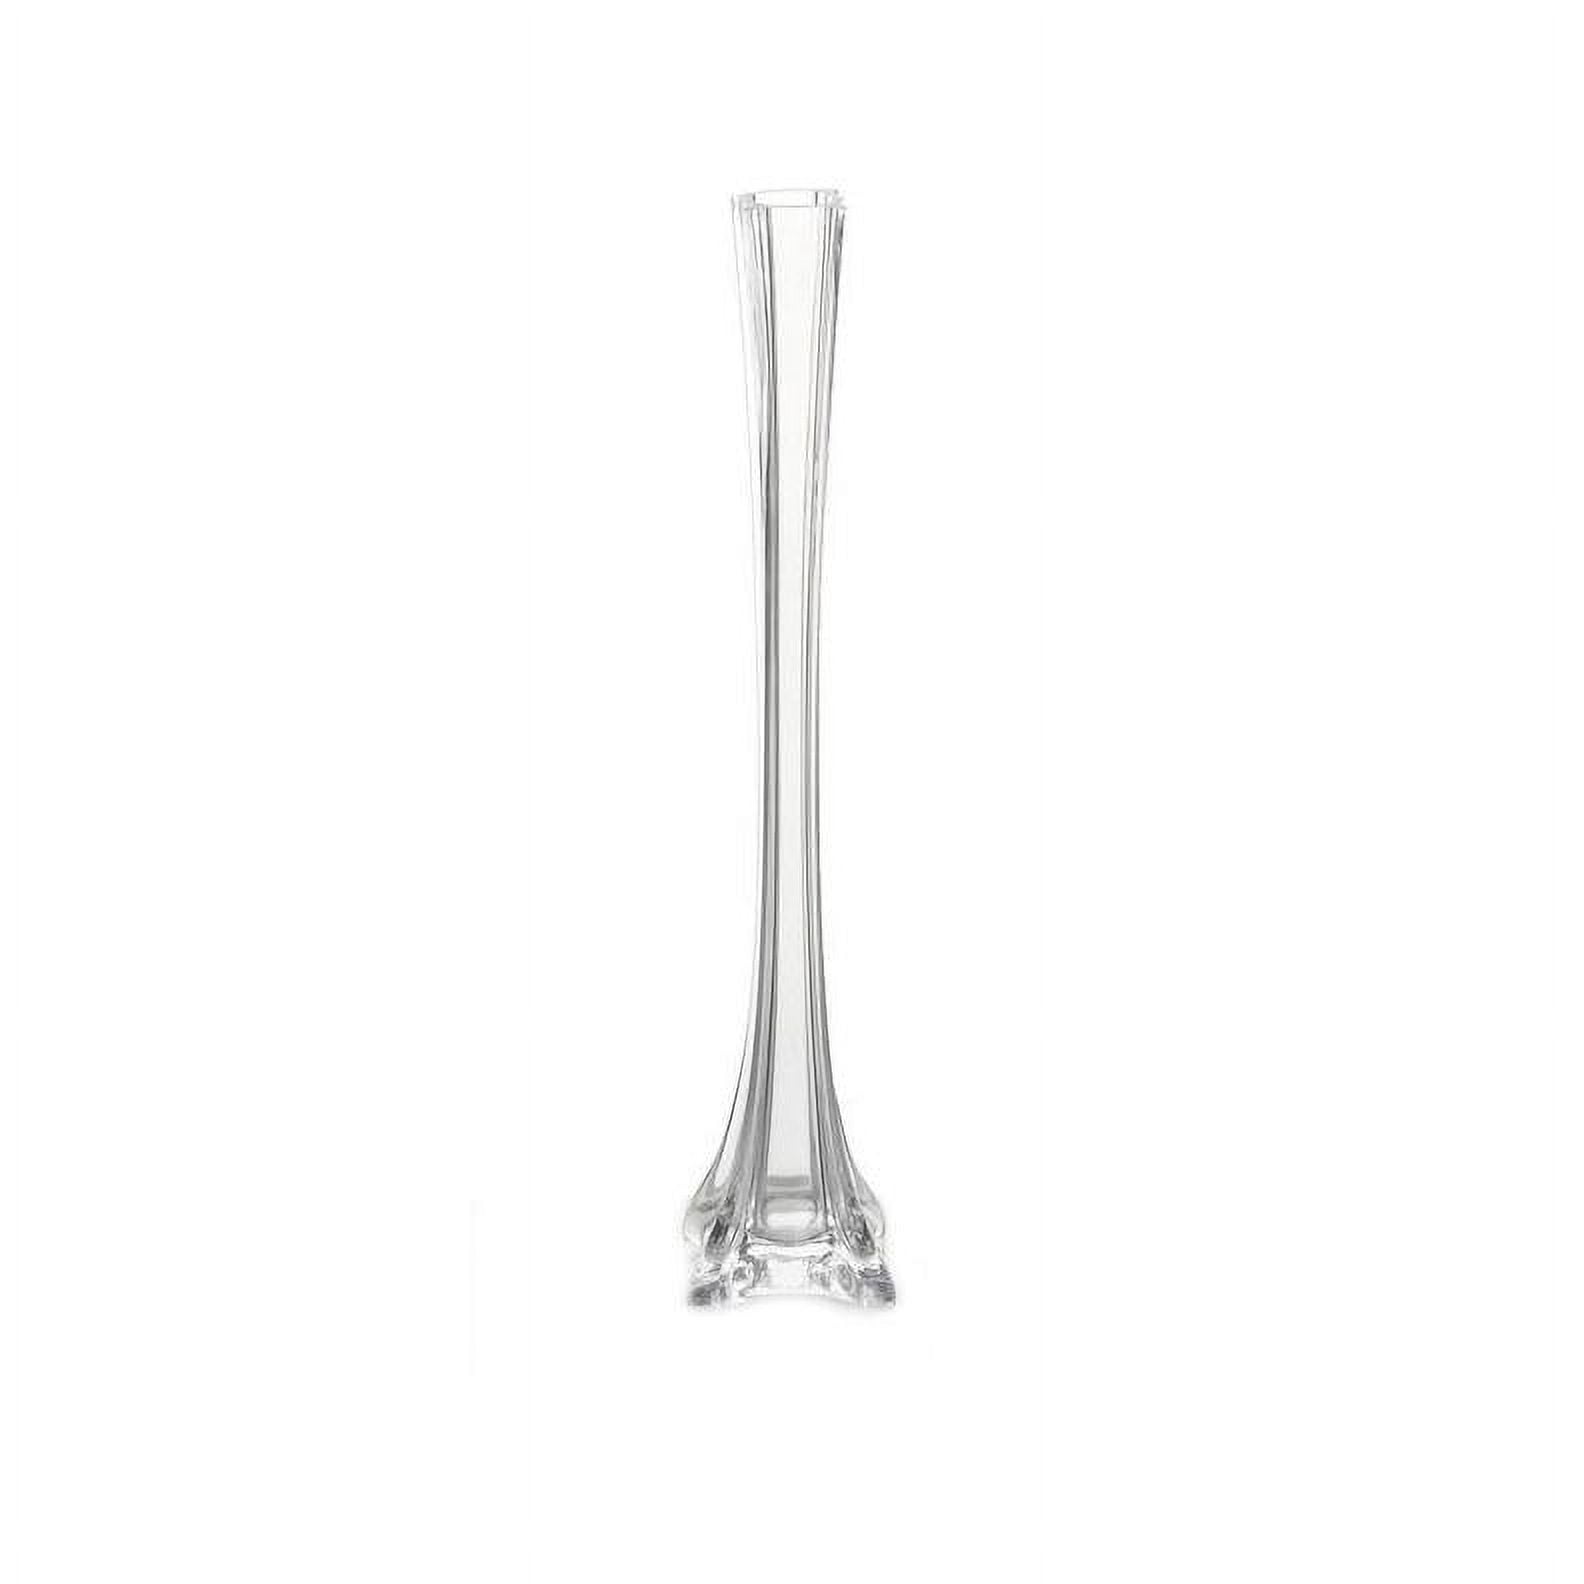 20 Inch Eiffel Tower Vases  Glass Tower Vase - Events Wholesale